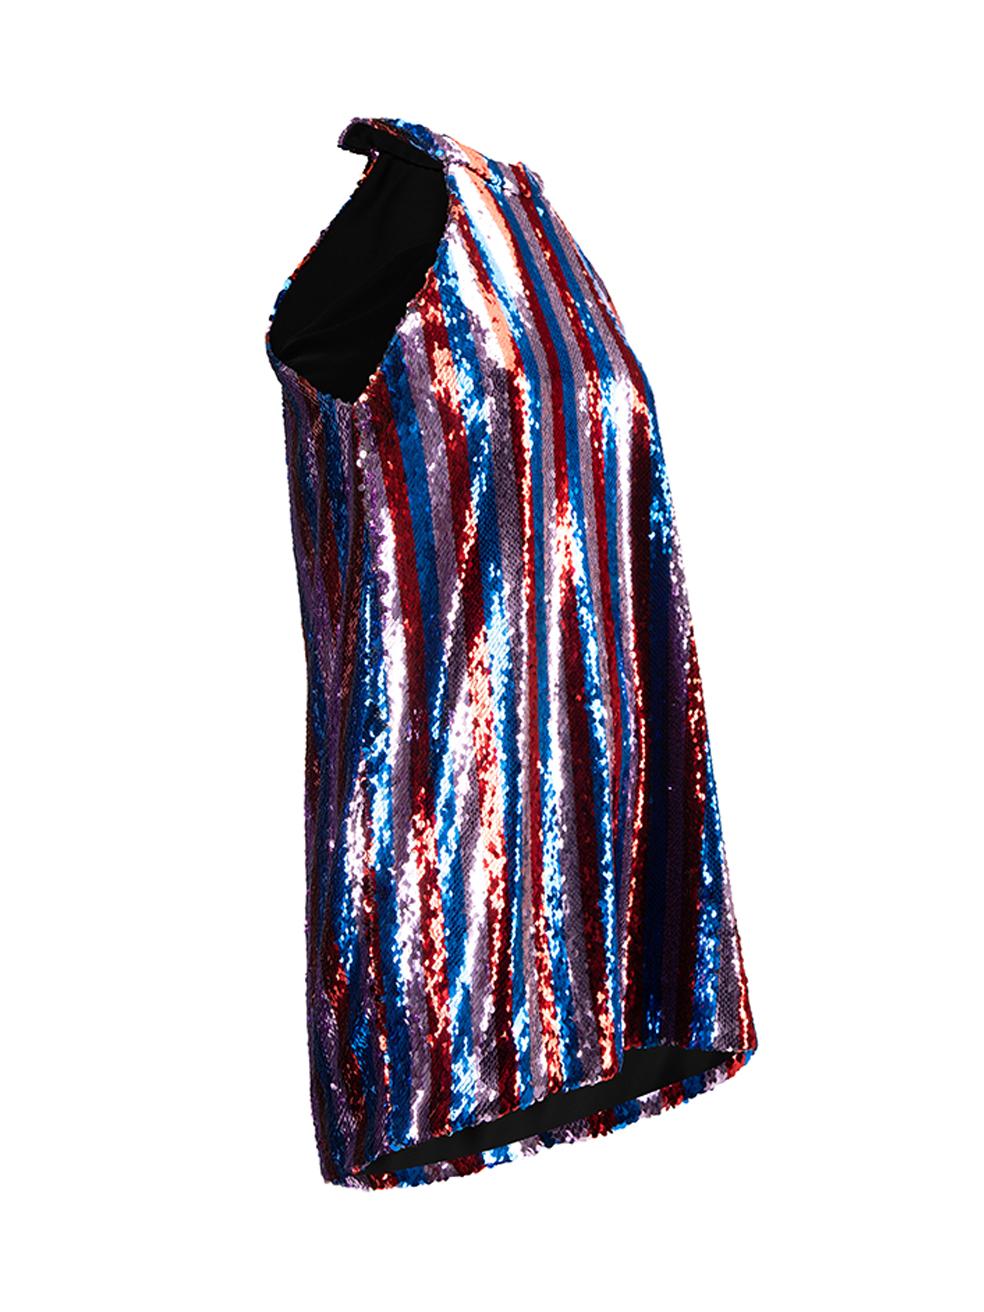 CONDITION is Very good. Hardly any visible wear to dress is evident. Minor loose threads can be seen on this used Halpern designer resale item.  Details  Multicolour Sequinned Figure hugging Striped pattern Halterneck Mini dress Sleeveless